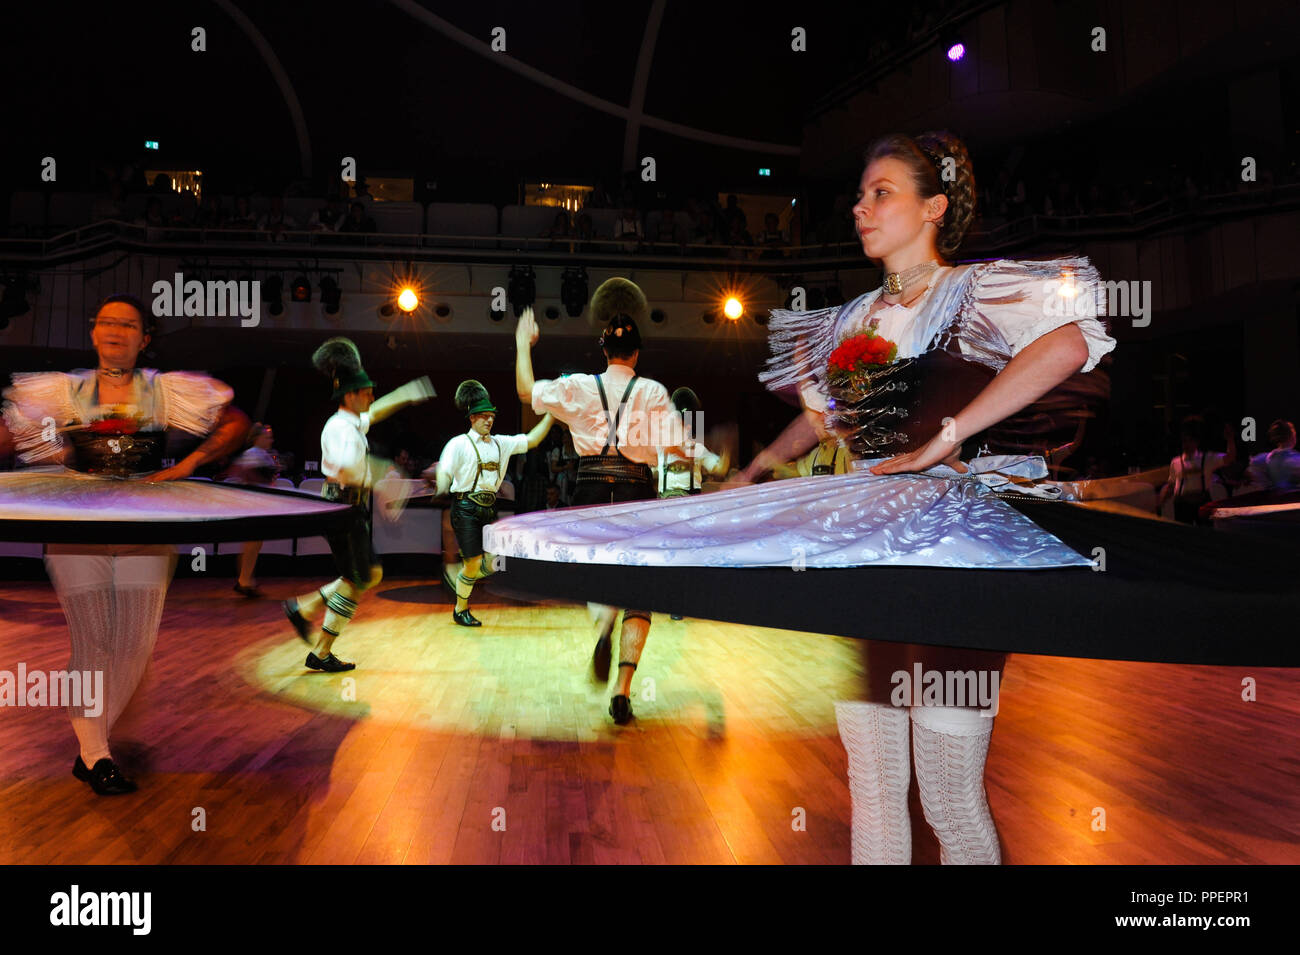 The German Theatre Munich and Festring Munich organize the 'Oide Wiesn citizens Ball'. A folk dance group on stage Stock Photo